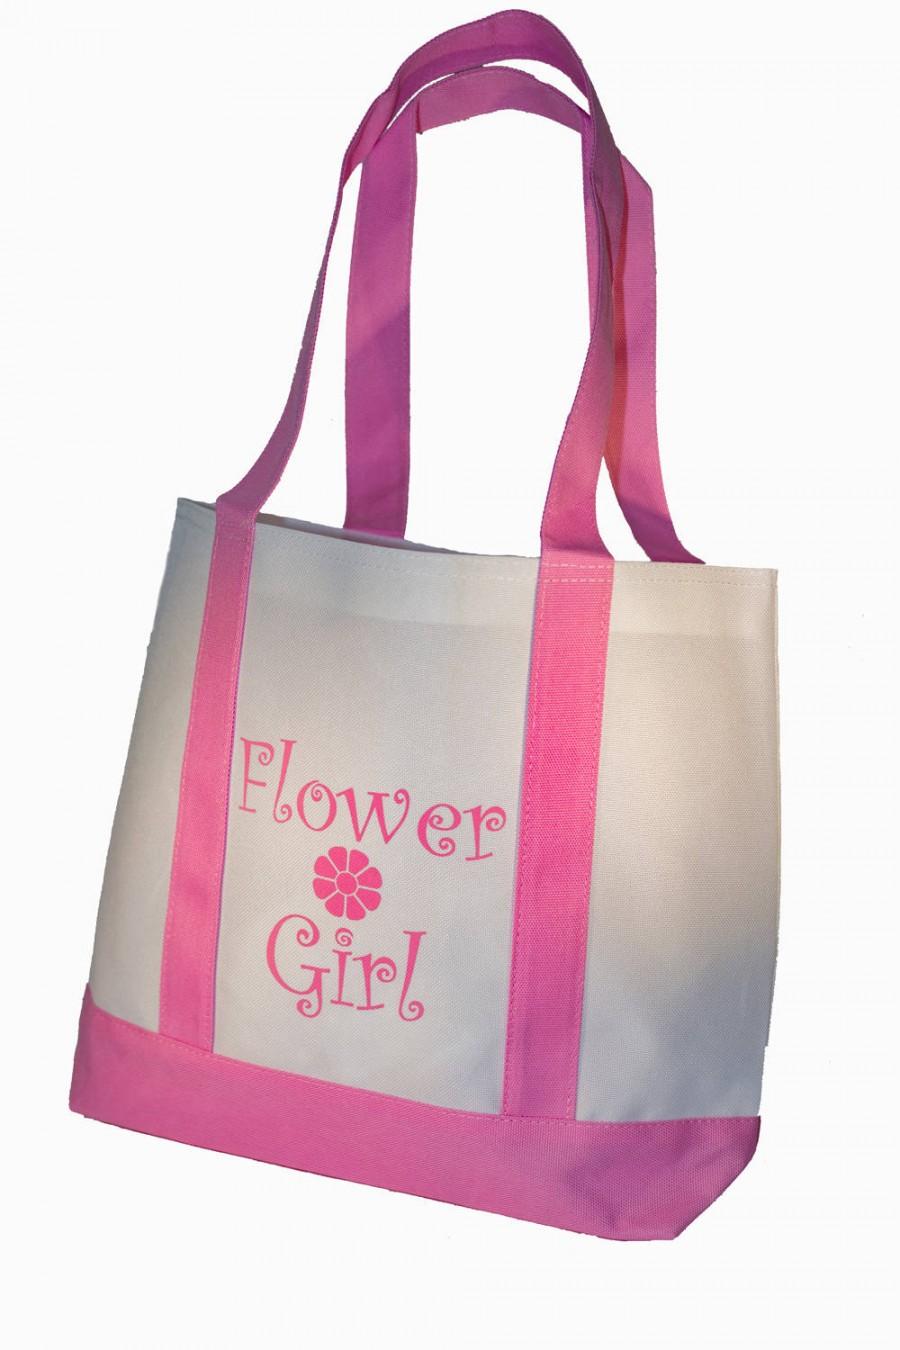 Hochzeit - Flower Girl Tote Bag with Pink Straps Wedding Flower Girl Gifts Free Shipping